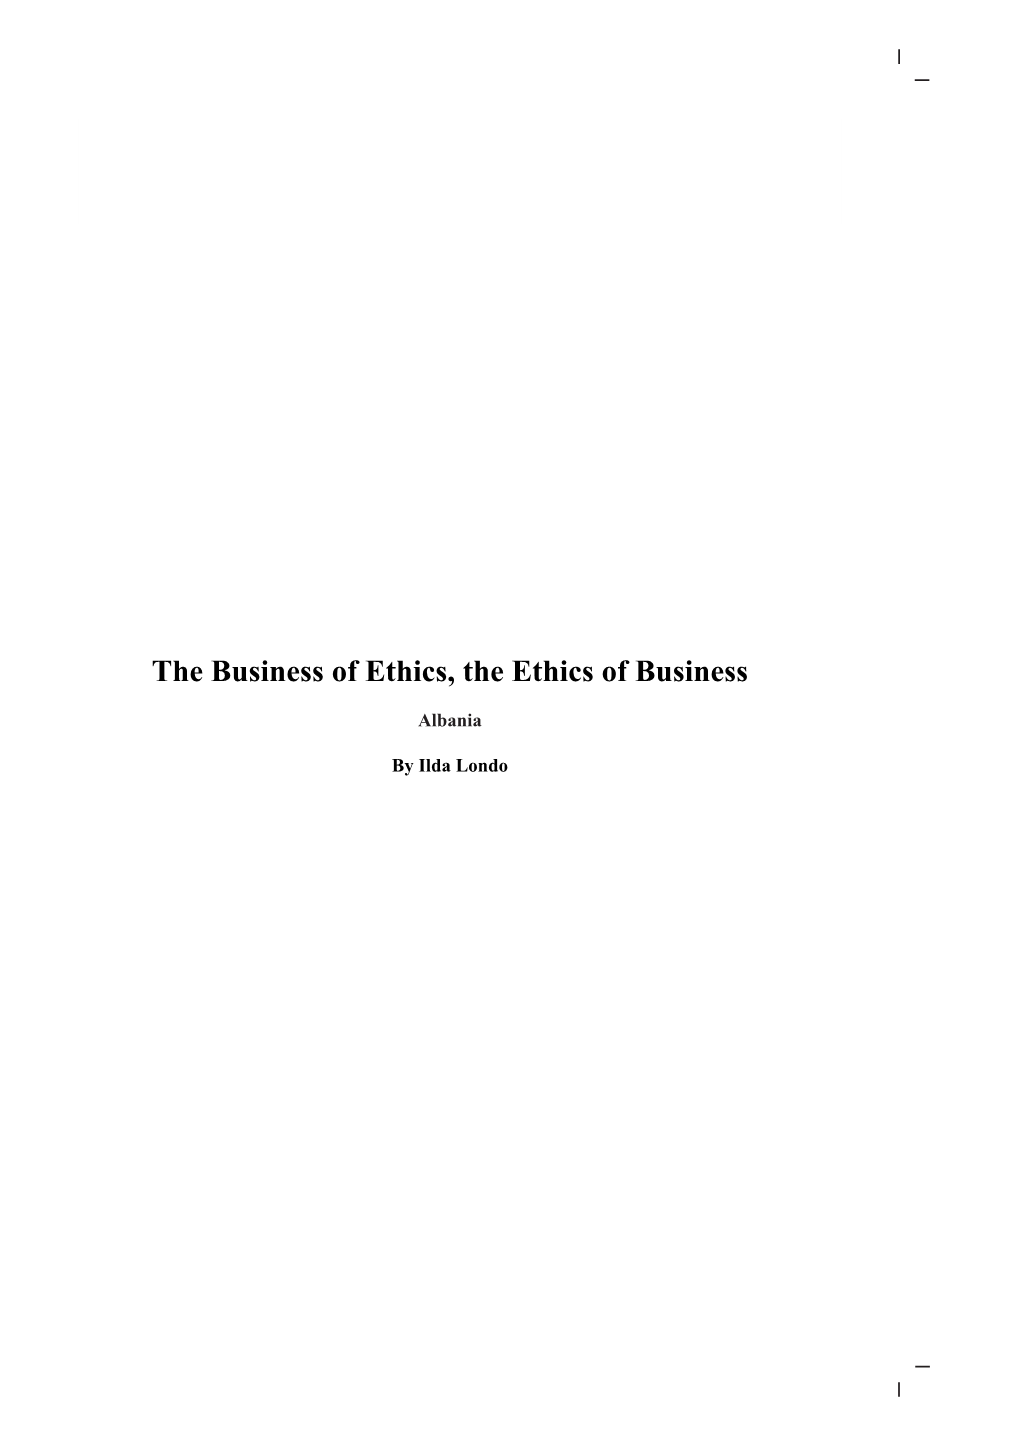 The Business of Ethics, the Ethics of Business